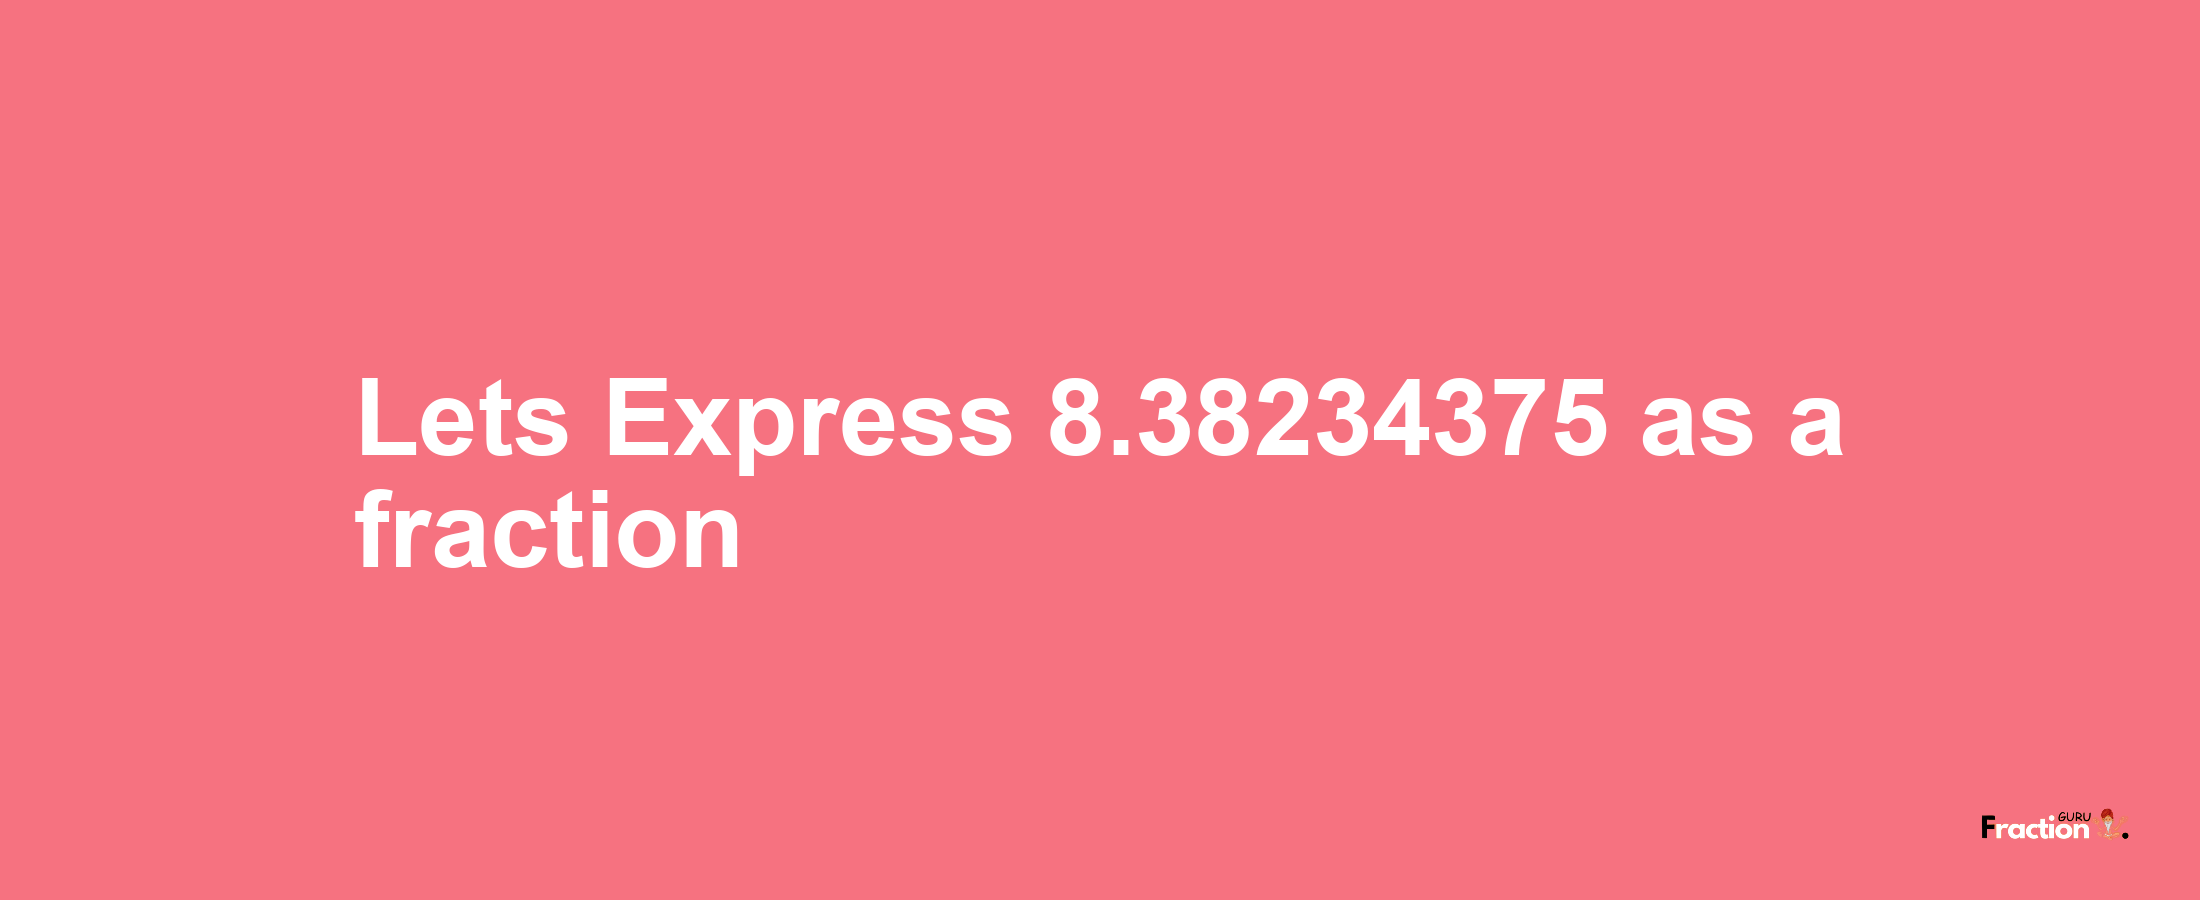 Lets Express 8.38234375 as afraction